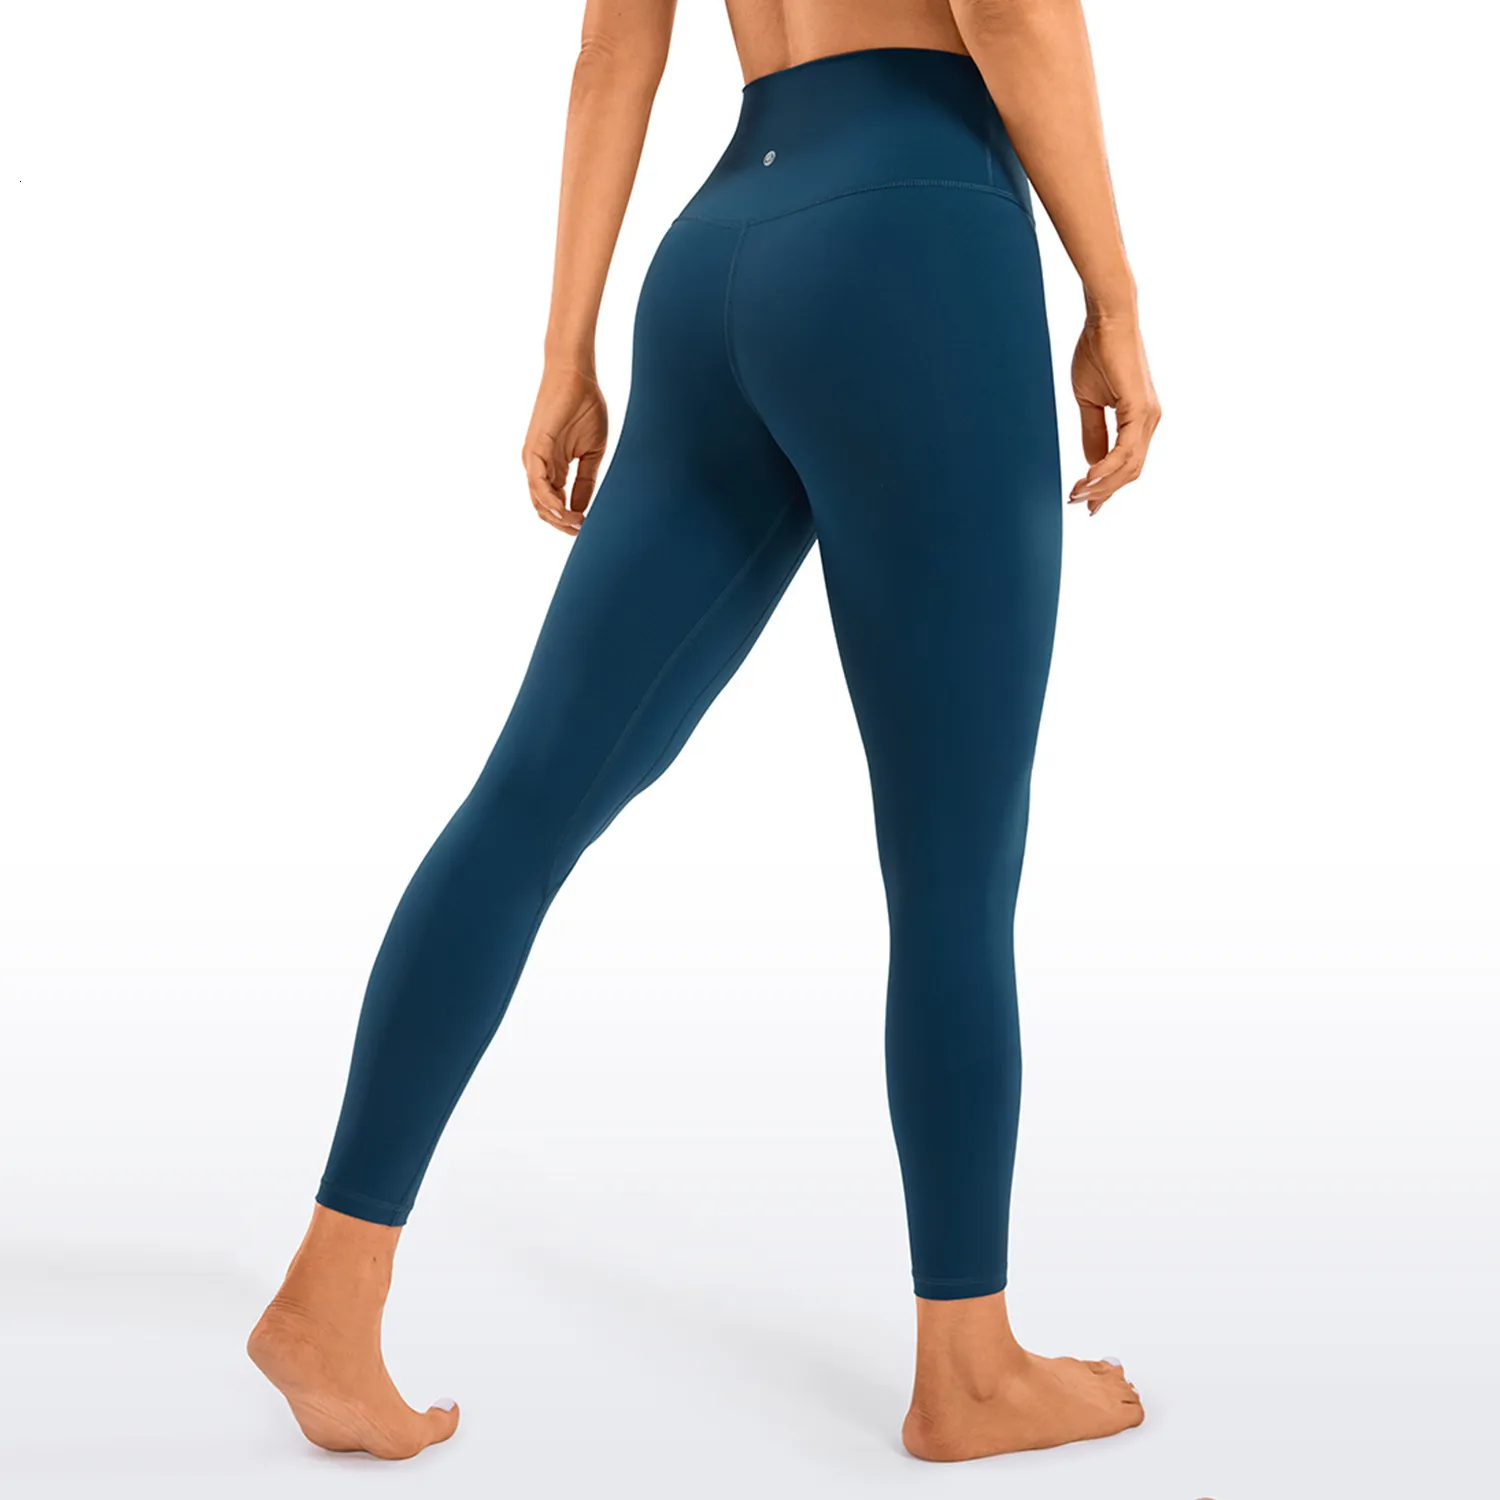 Yoga Outfit CRZ YOGA Womens Naked Feeling Pants 25 Inches 7 8 High Waisted Workout  Leggings 230925 From Bian05, $14.99